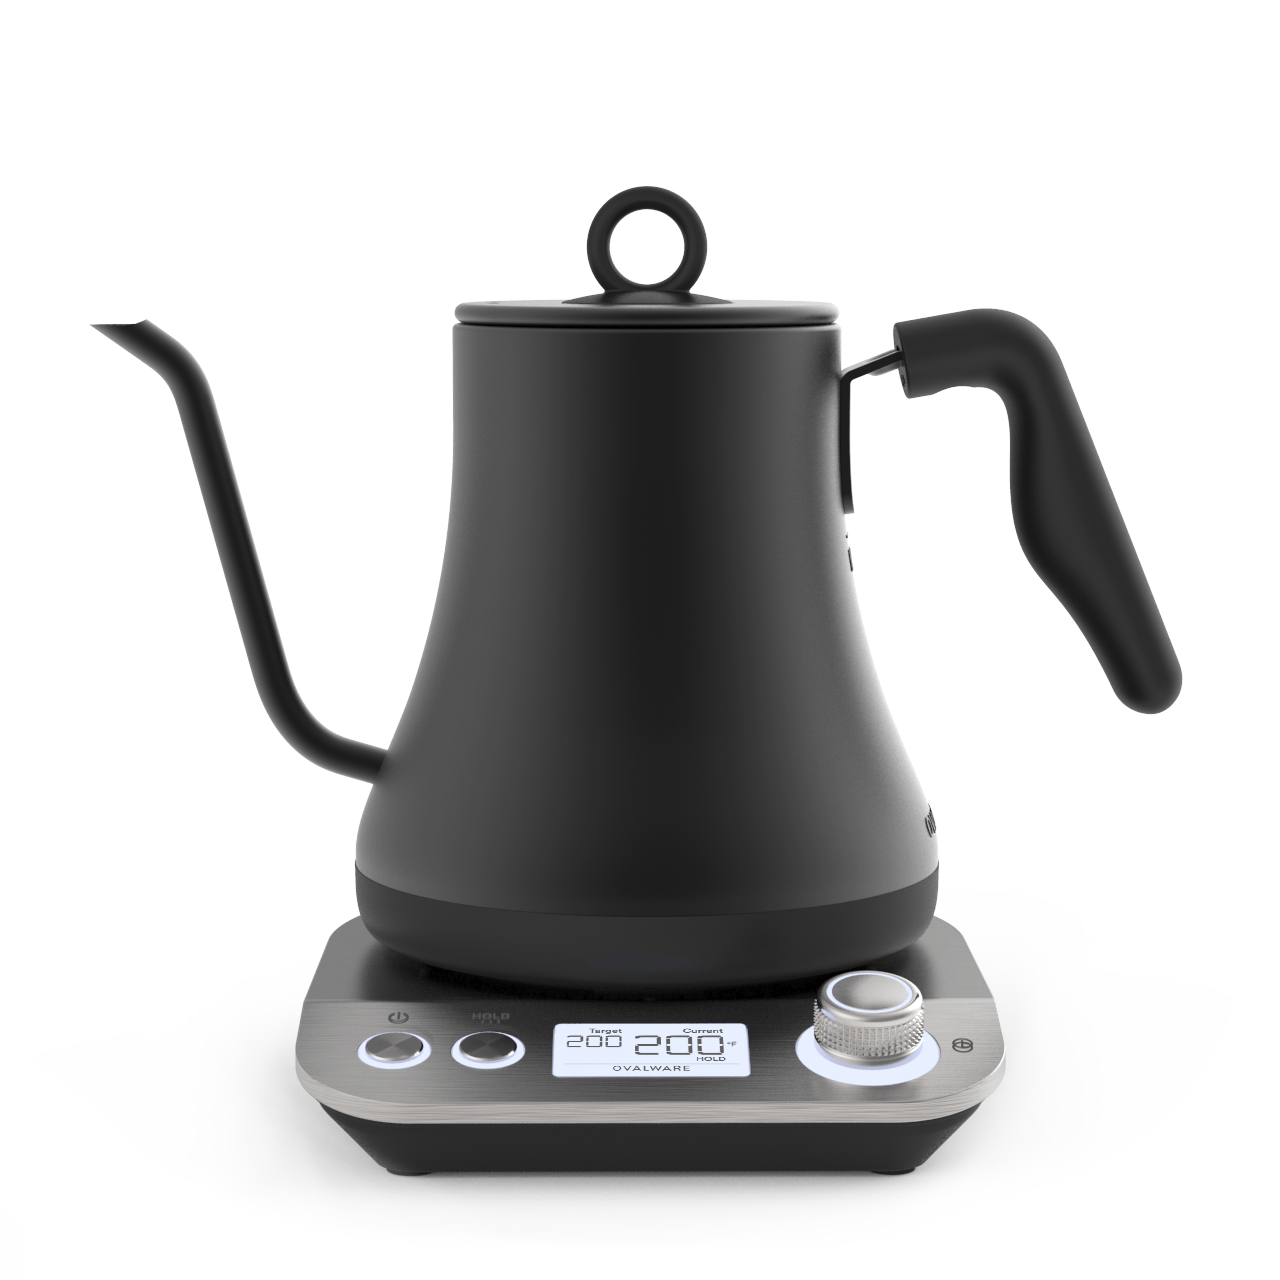 A sleek, black Electric Pour Over Kettle by Magic Hour with a goose-neck spout is placed on a base featuring a digital display and control knob. The display shows "200°F," perfect for brewing delicate loose leaf tea. The base has smooth, rounded edges with a modern design.